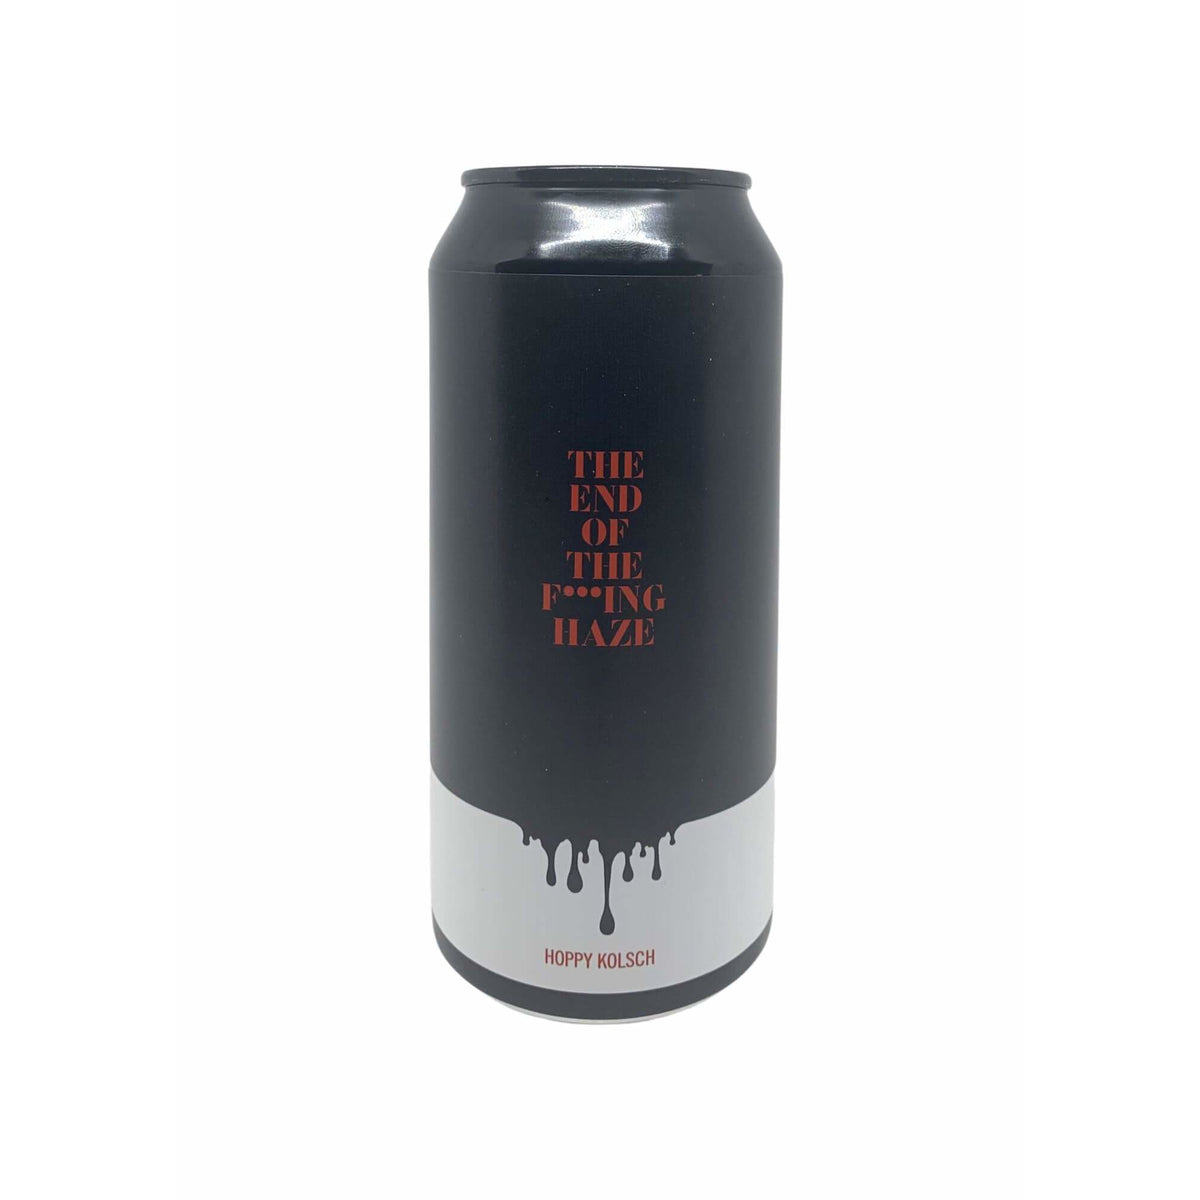 T.E.O.T.F.H | Maresme Brewery - Cans & Corks